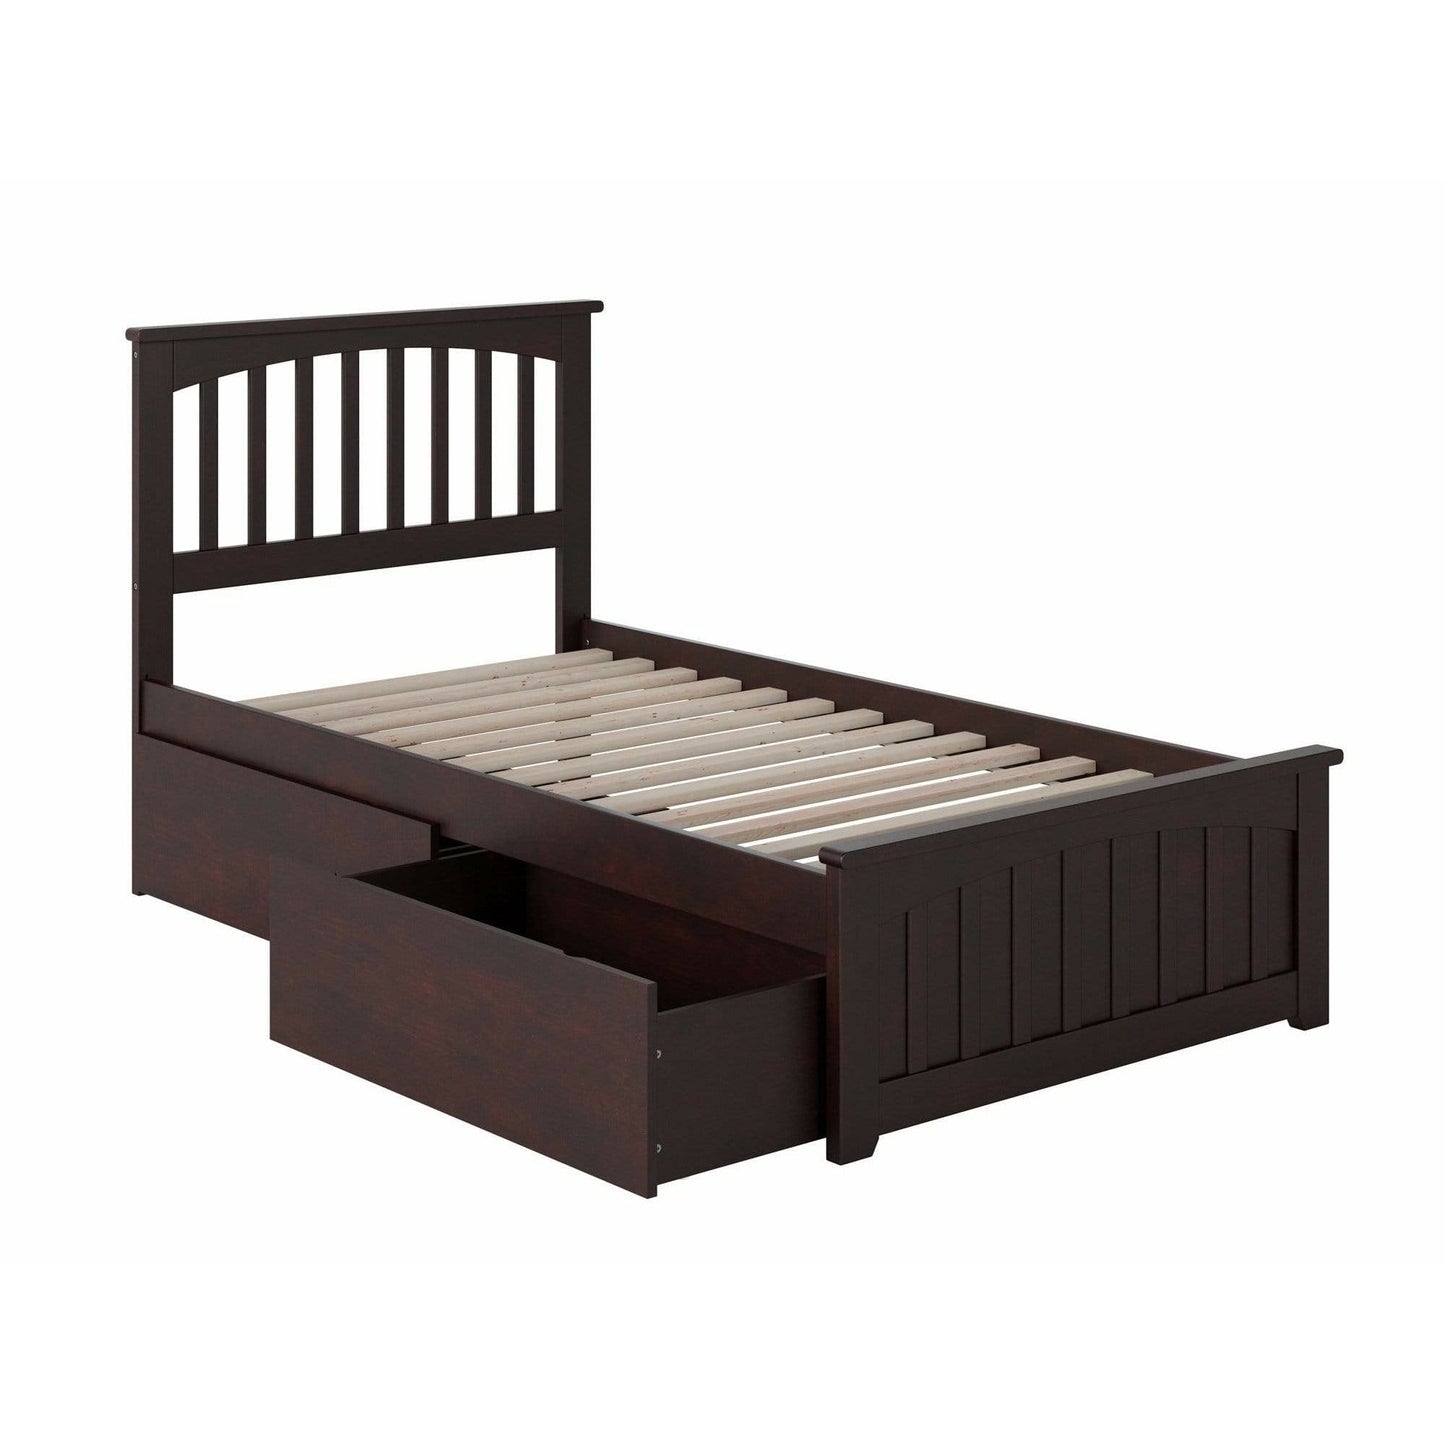 Atlantic Furniture Bed Mission Twin XL Platform Bed with Matching Foot Board with 2 Urban Bed Drawers in White